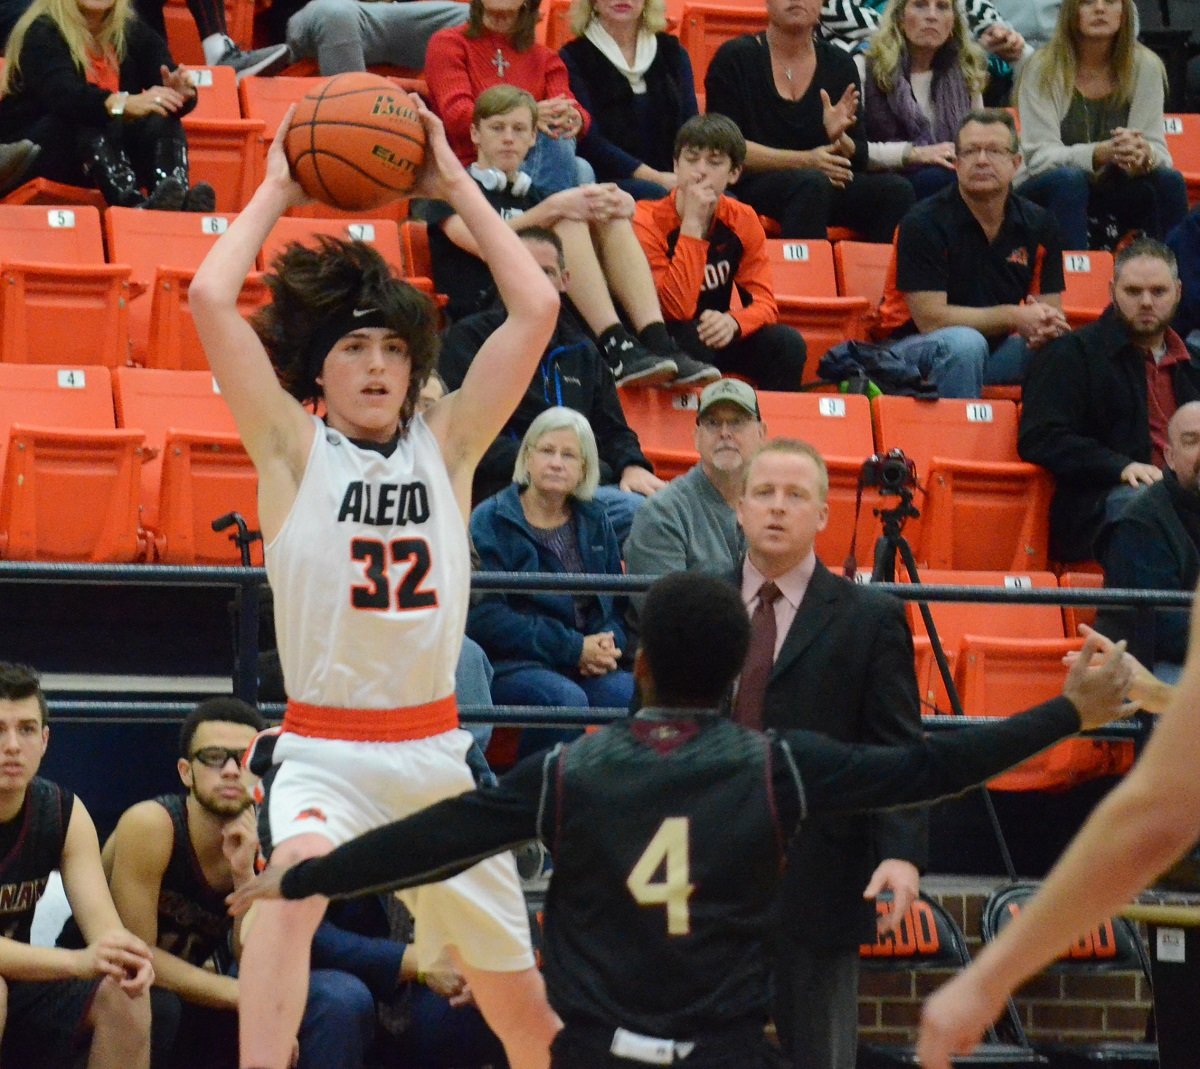 Aledo forward Noah Arrington (32) looks to pass during a recent game. The Bearcats will face Boswell in a boys' District 6-5A tiebreaker game to decide the final playoff spot. Tipoff is at 7:30 p.m. today at Azle High School. Photo by Tony Eierdam